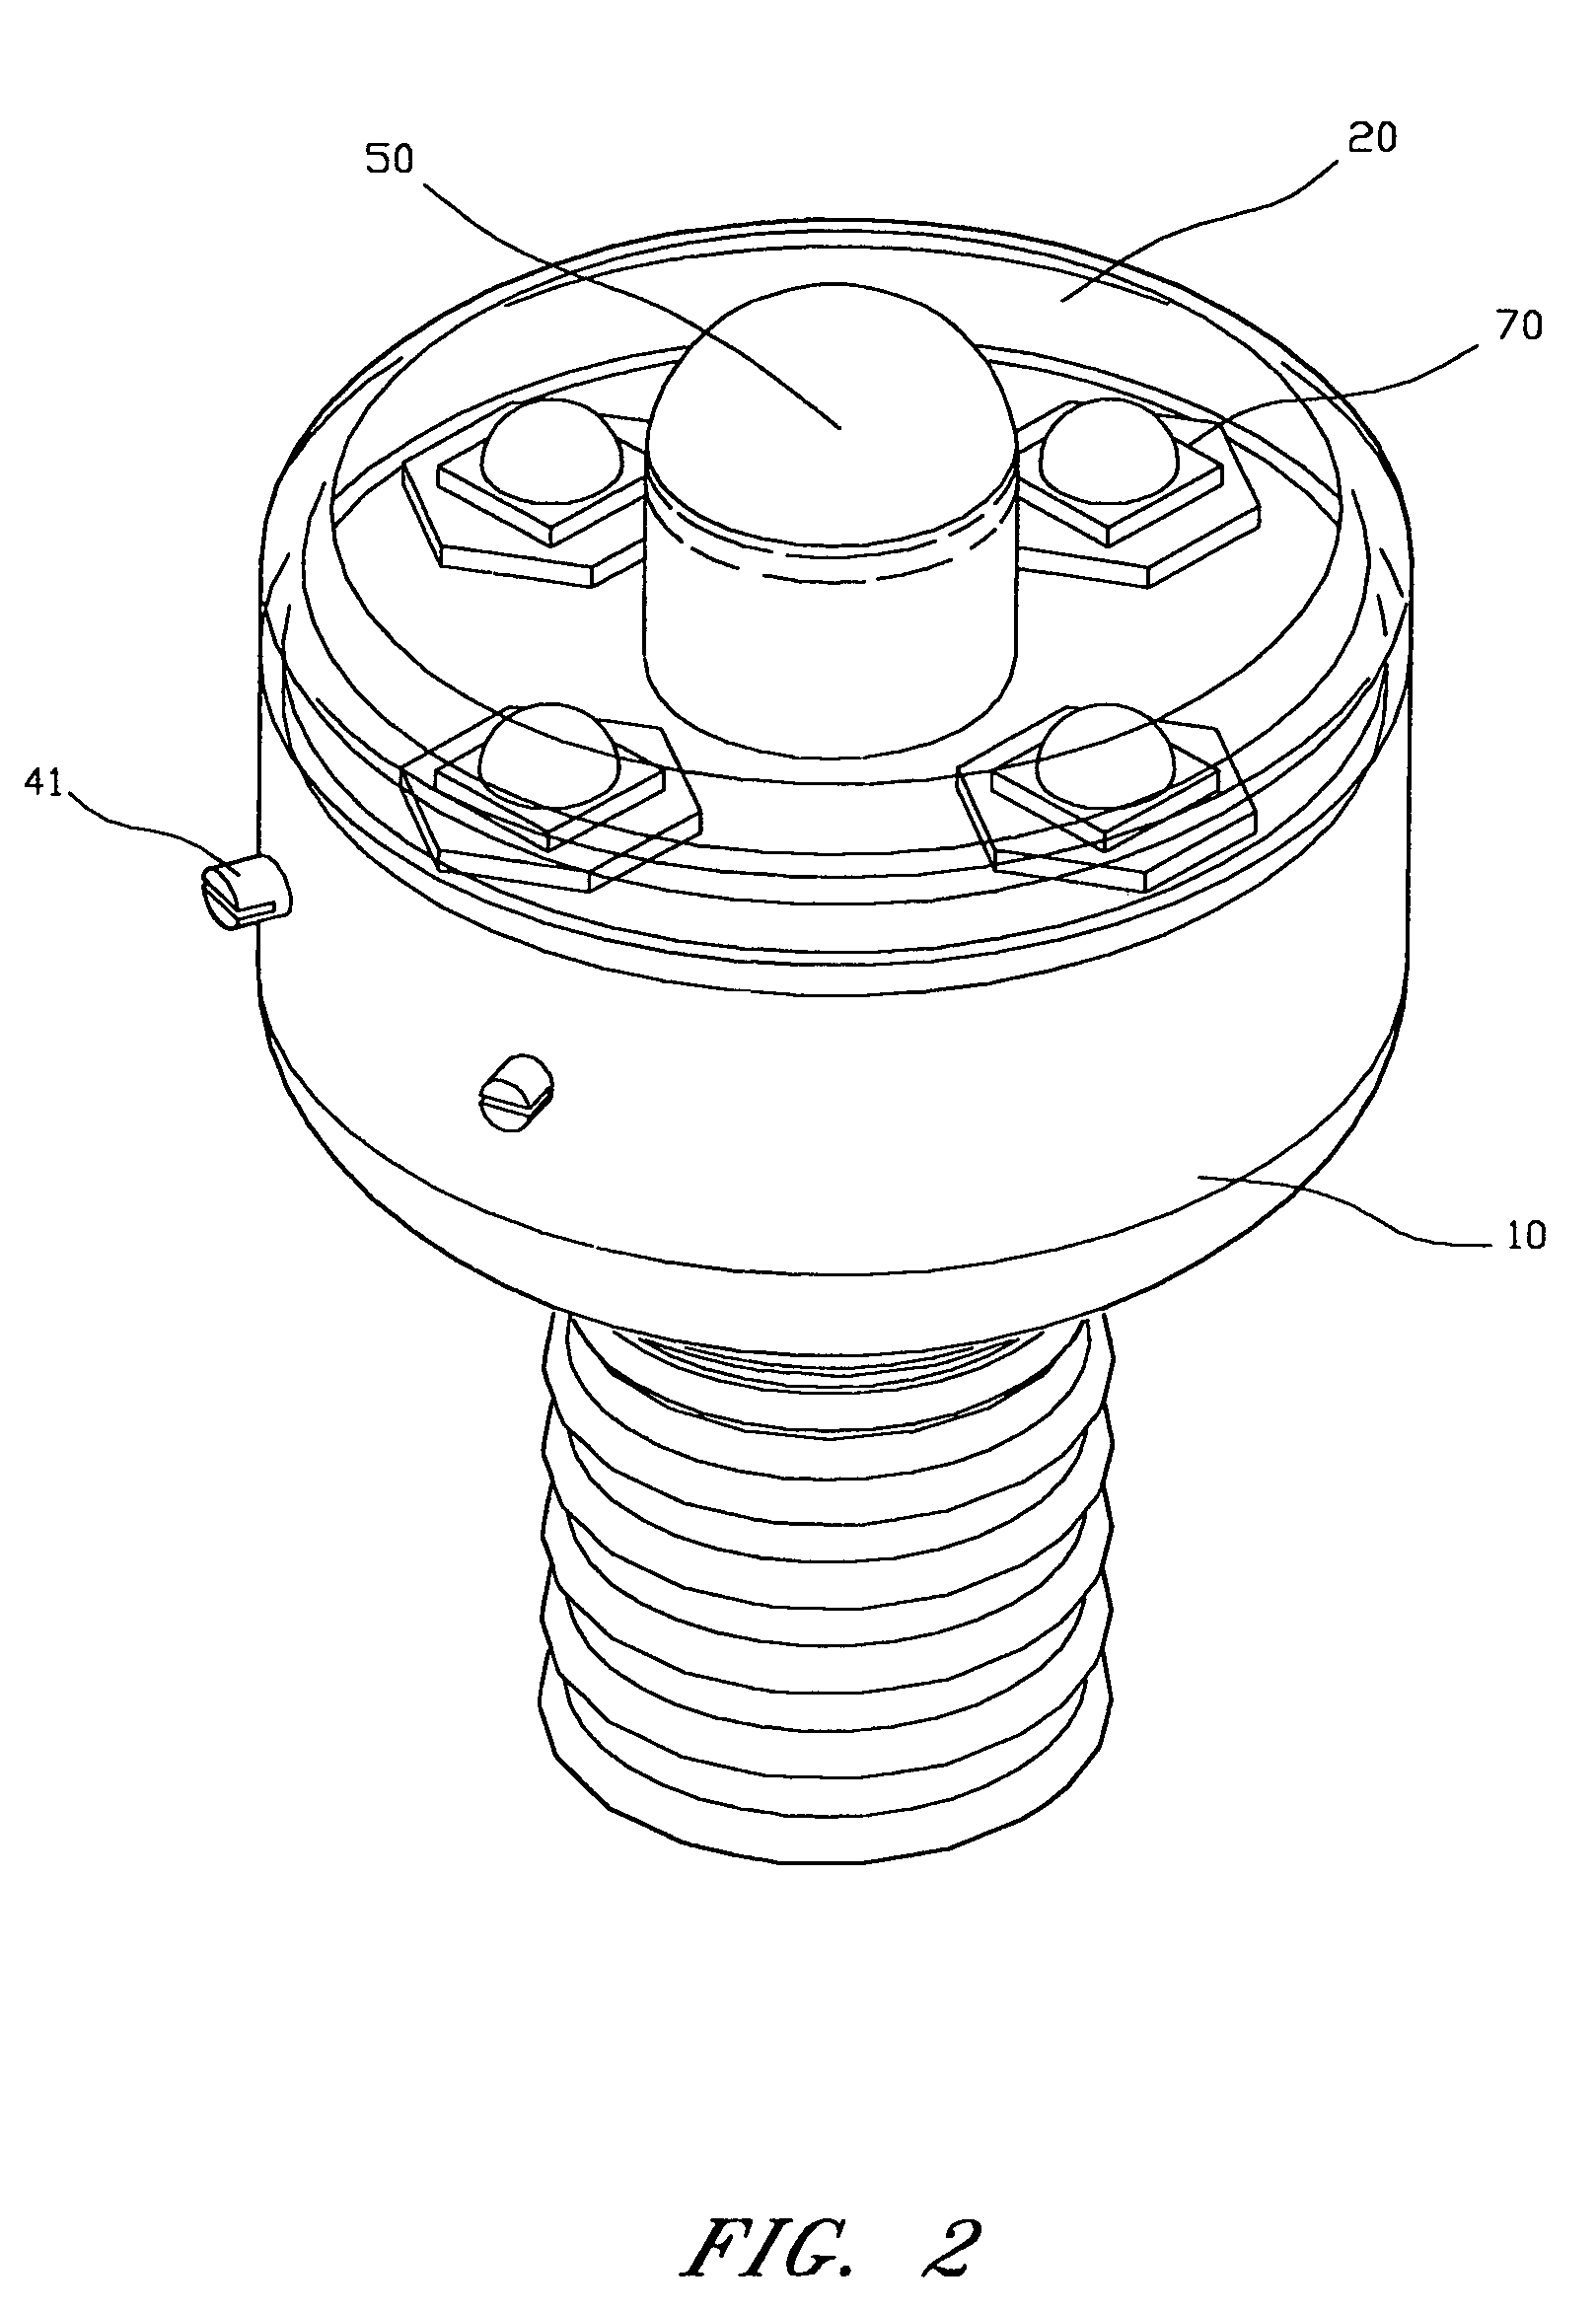 Bulb with sensing function